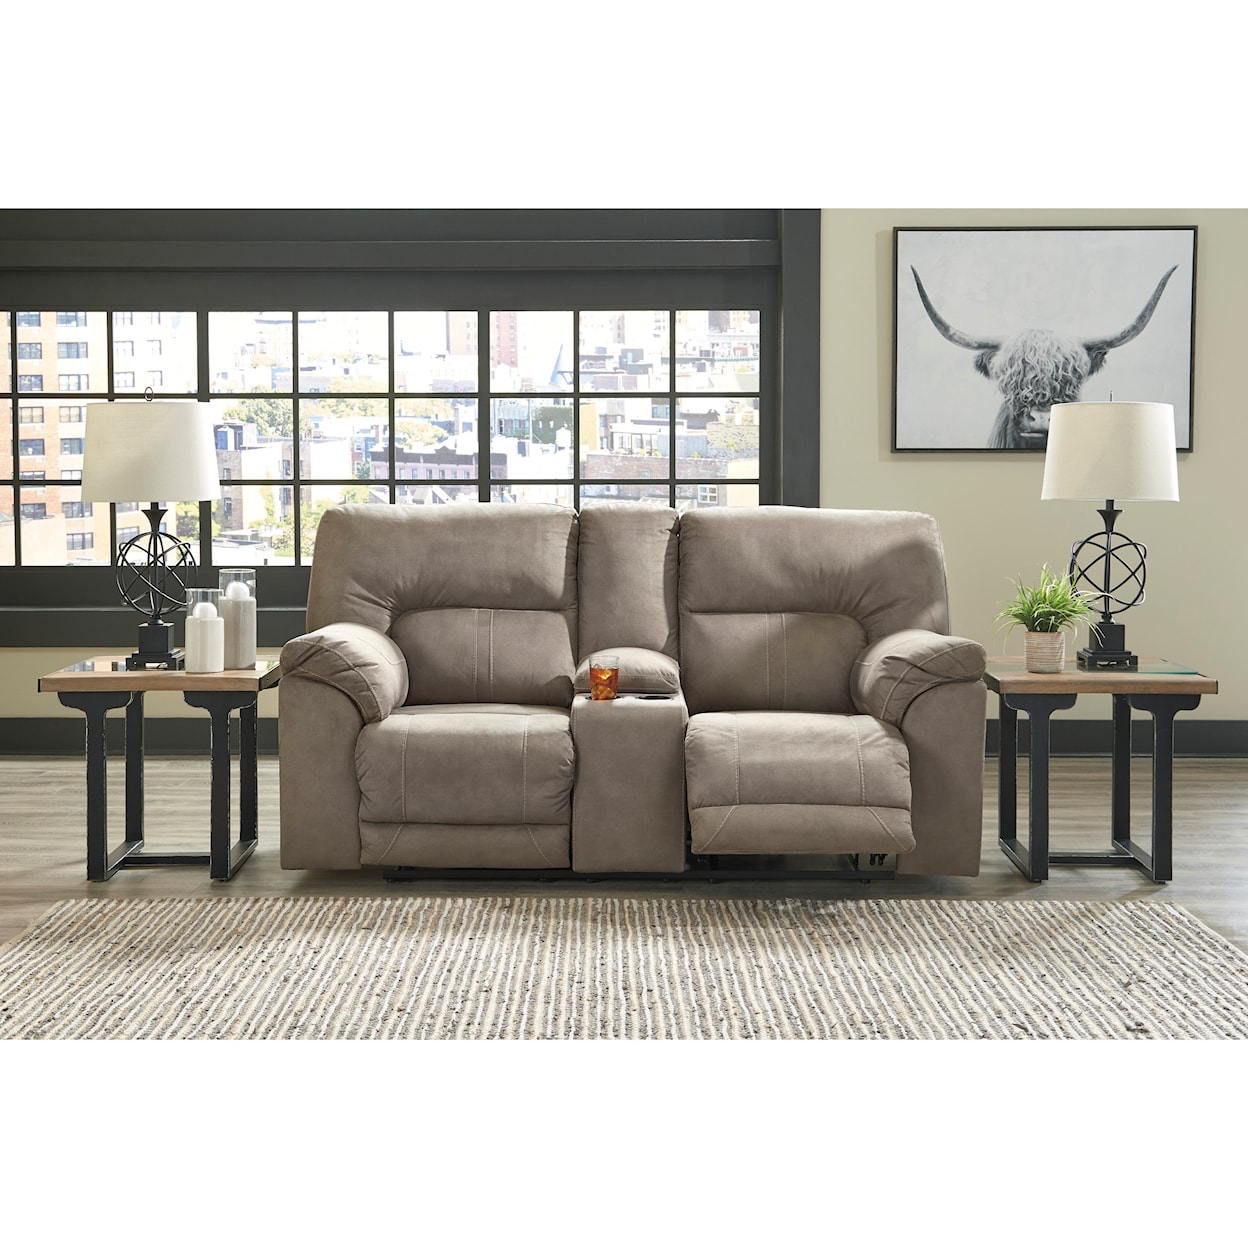 Ashley Furniture Benchcraft Cavalcade Double Reclining Power Loveseat with Console